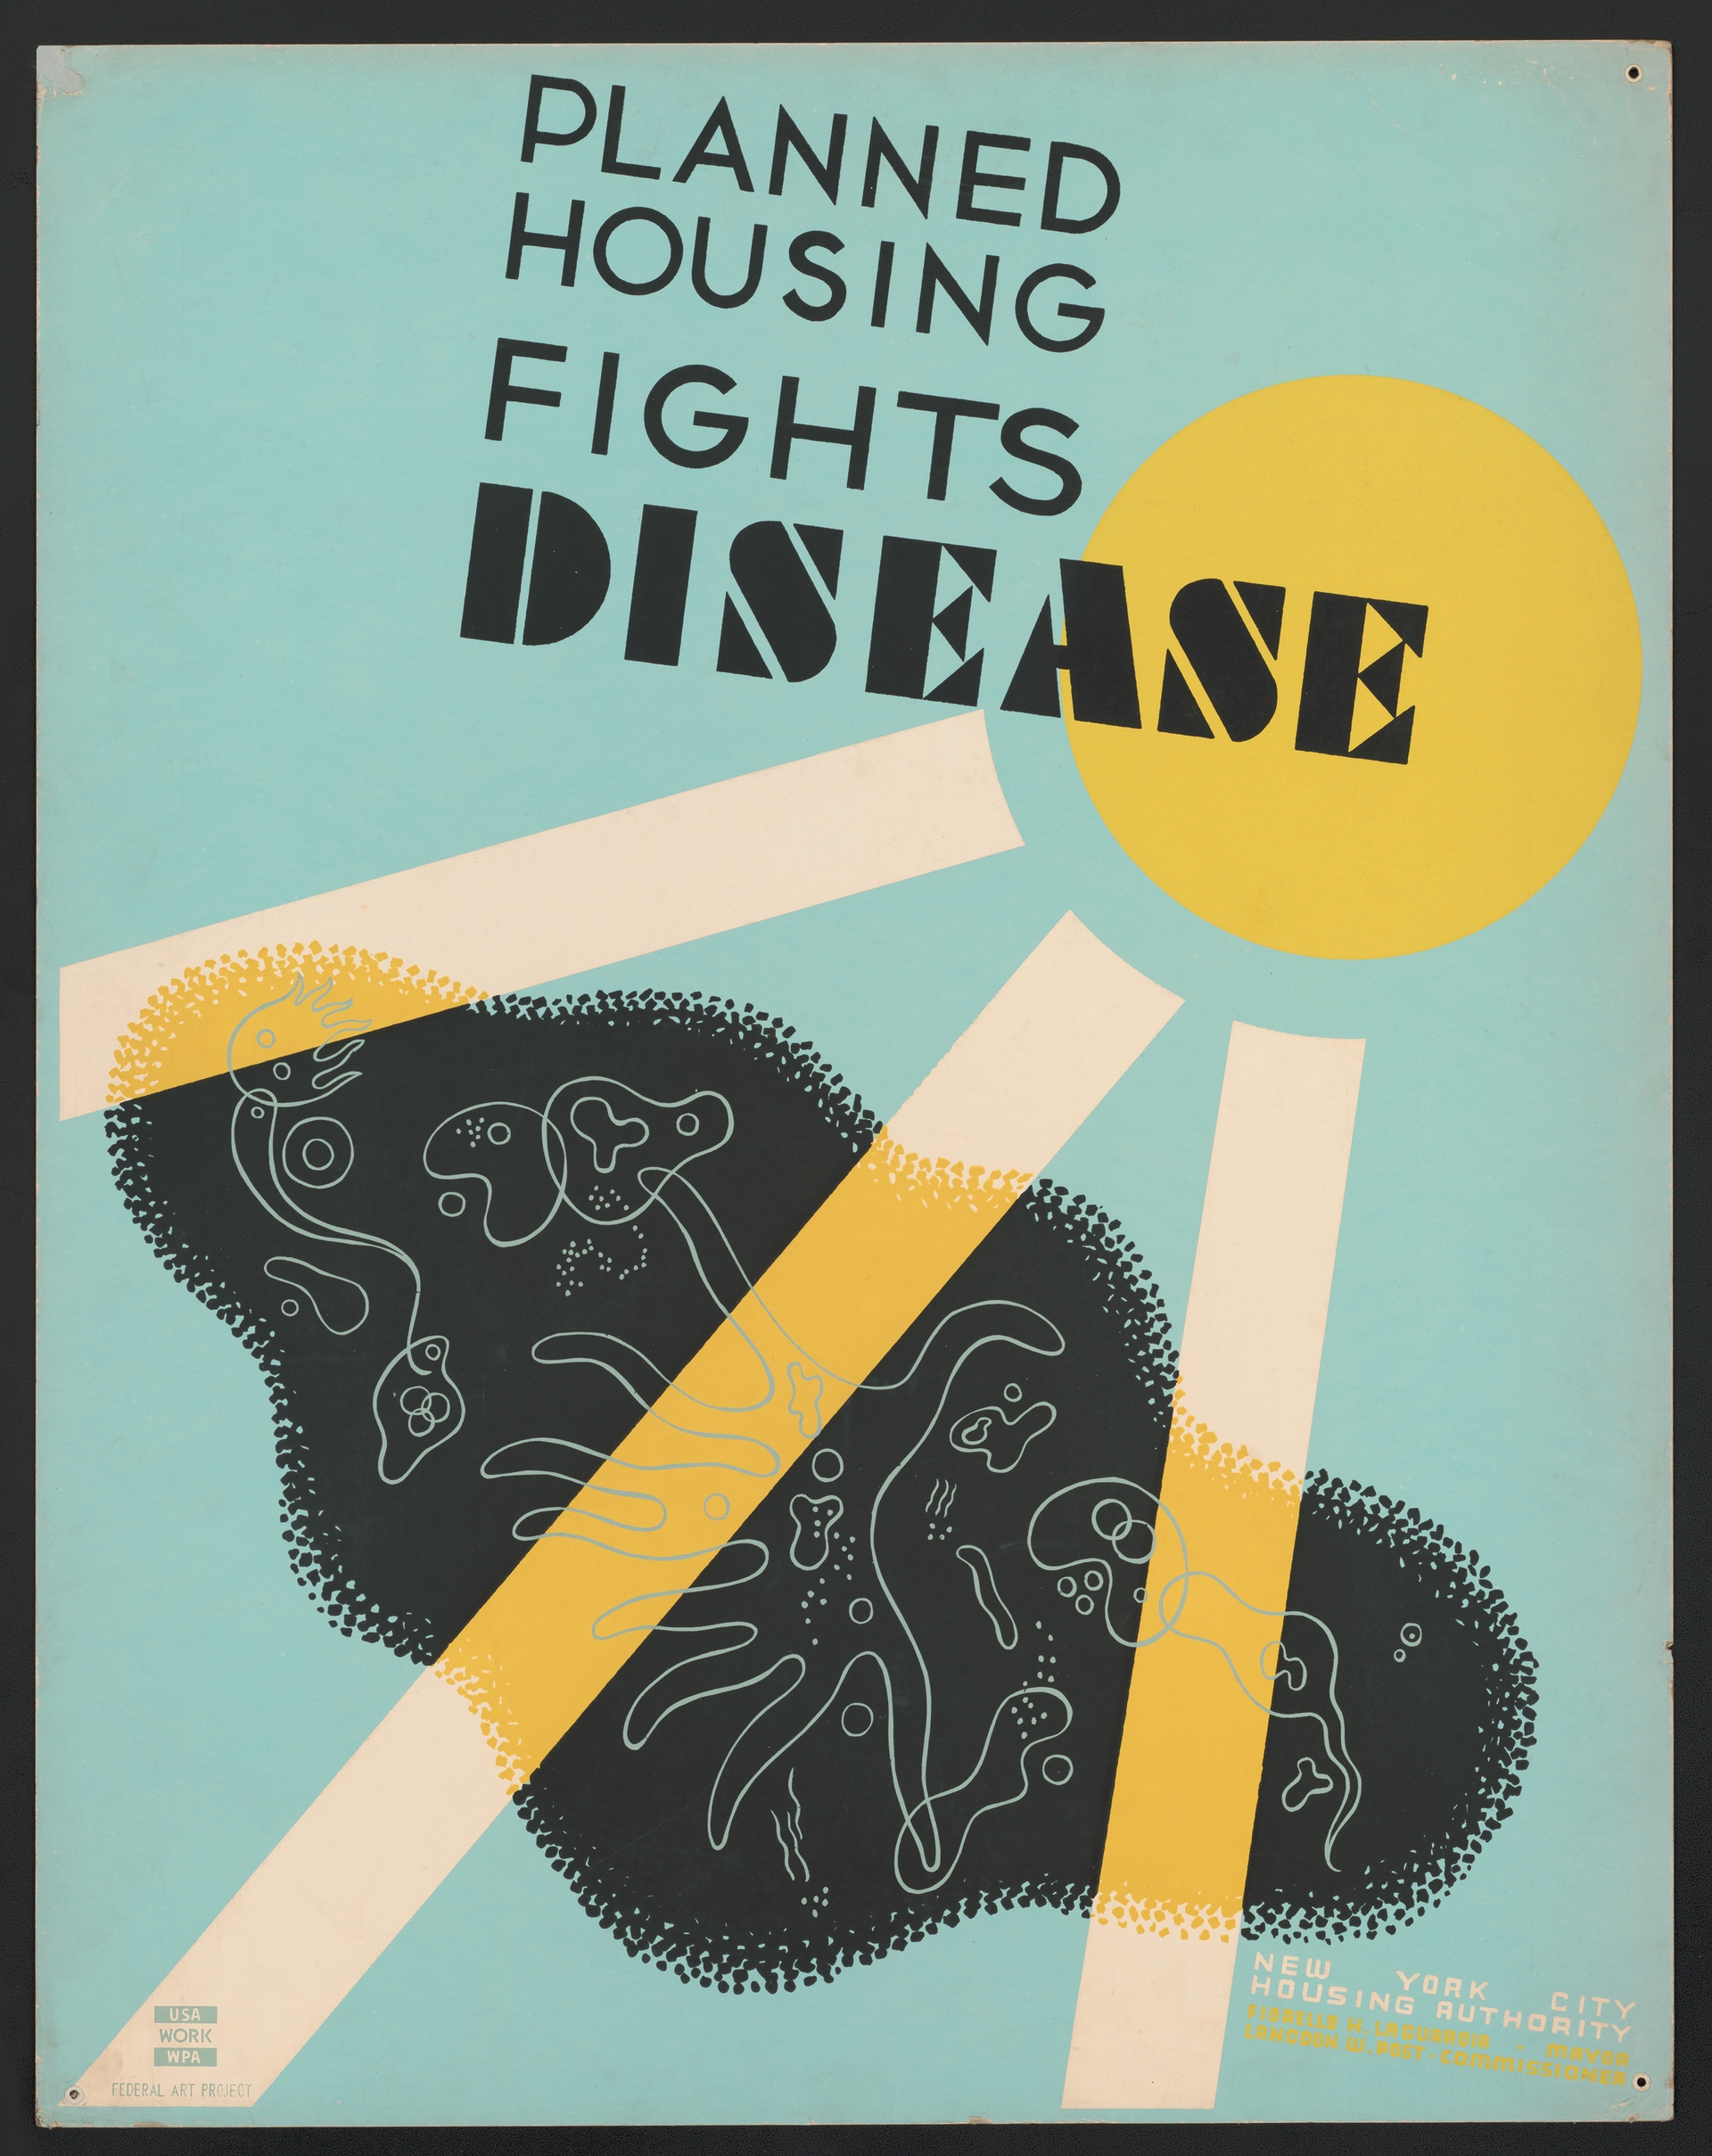 A poster created by the Federal Arts Project for the New York City Housing Authority with the slogan that "Planned housing fights disease" with images of microorganisms.